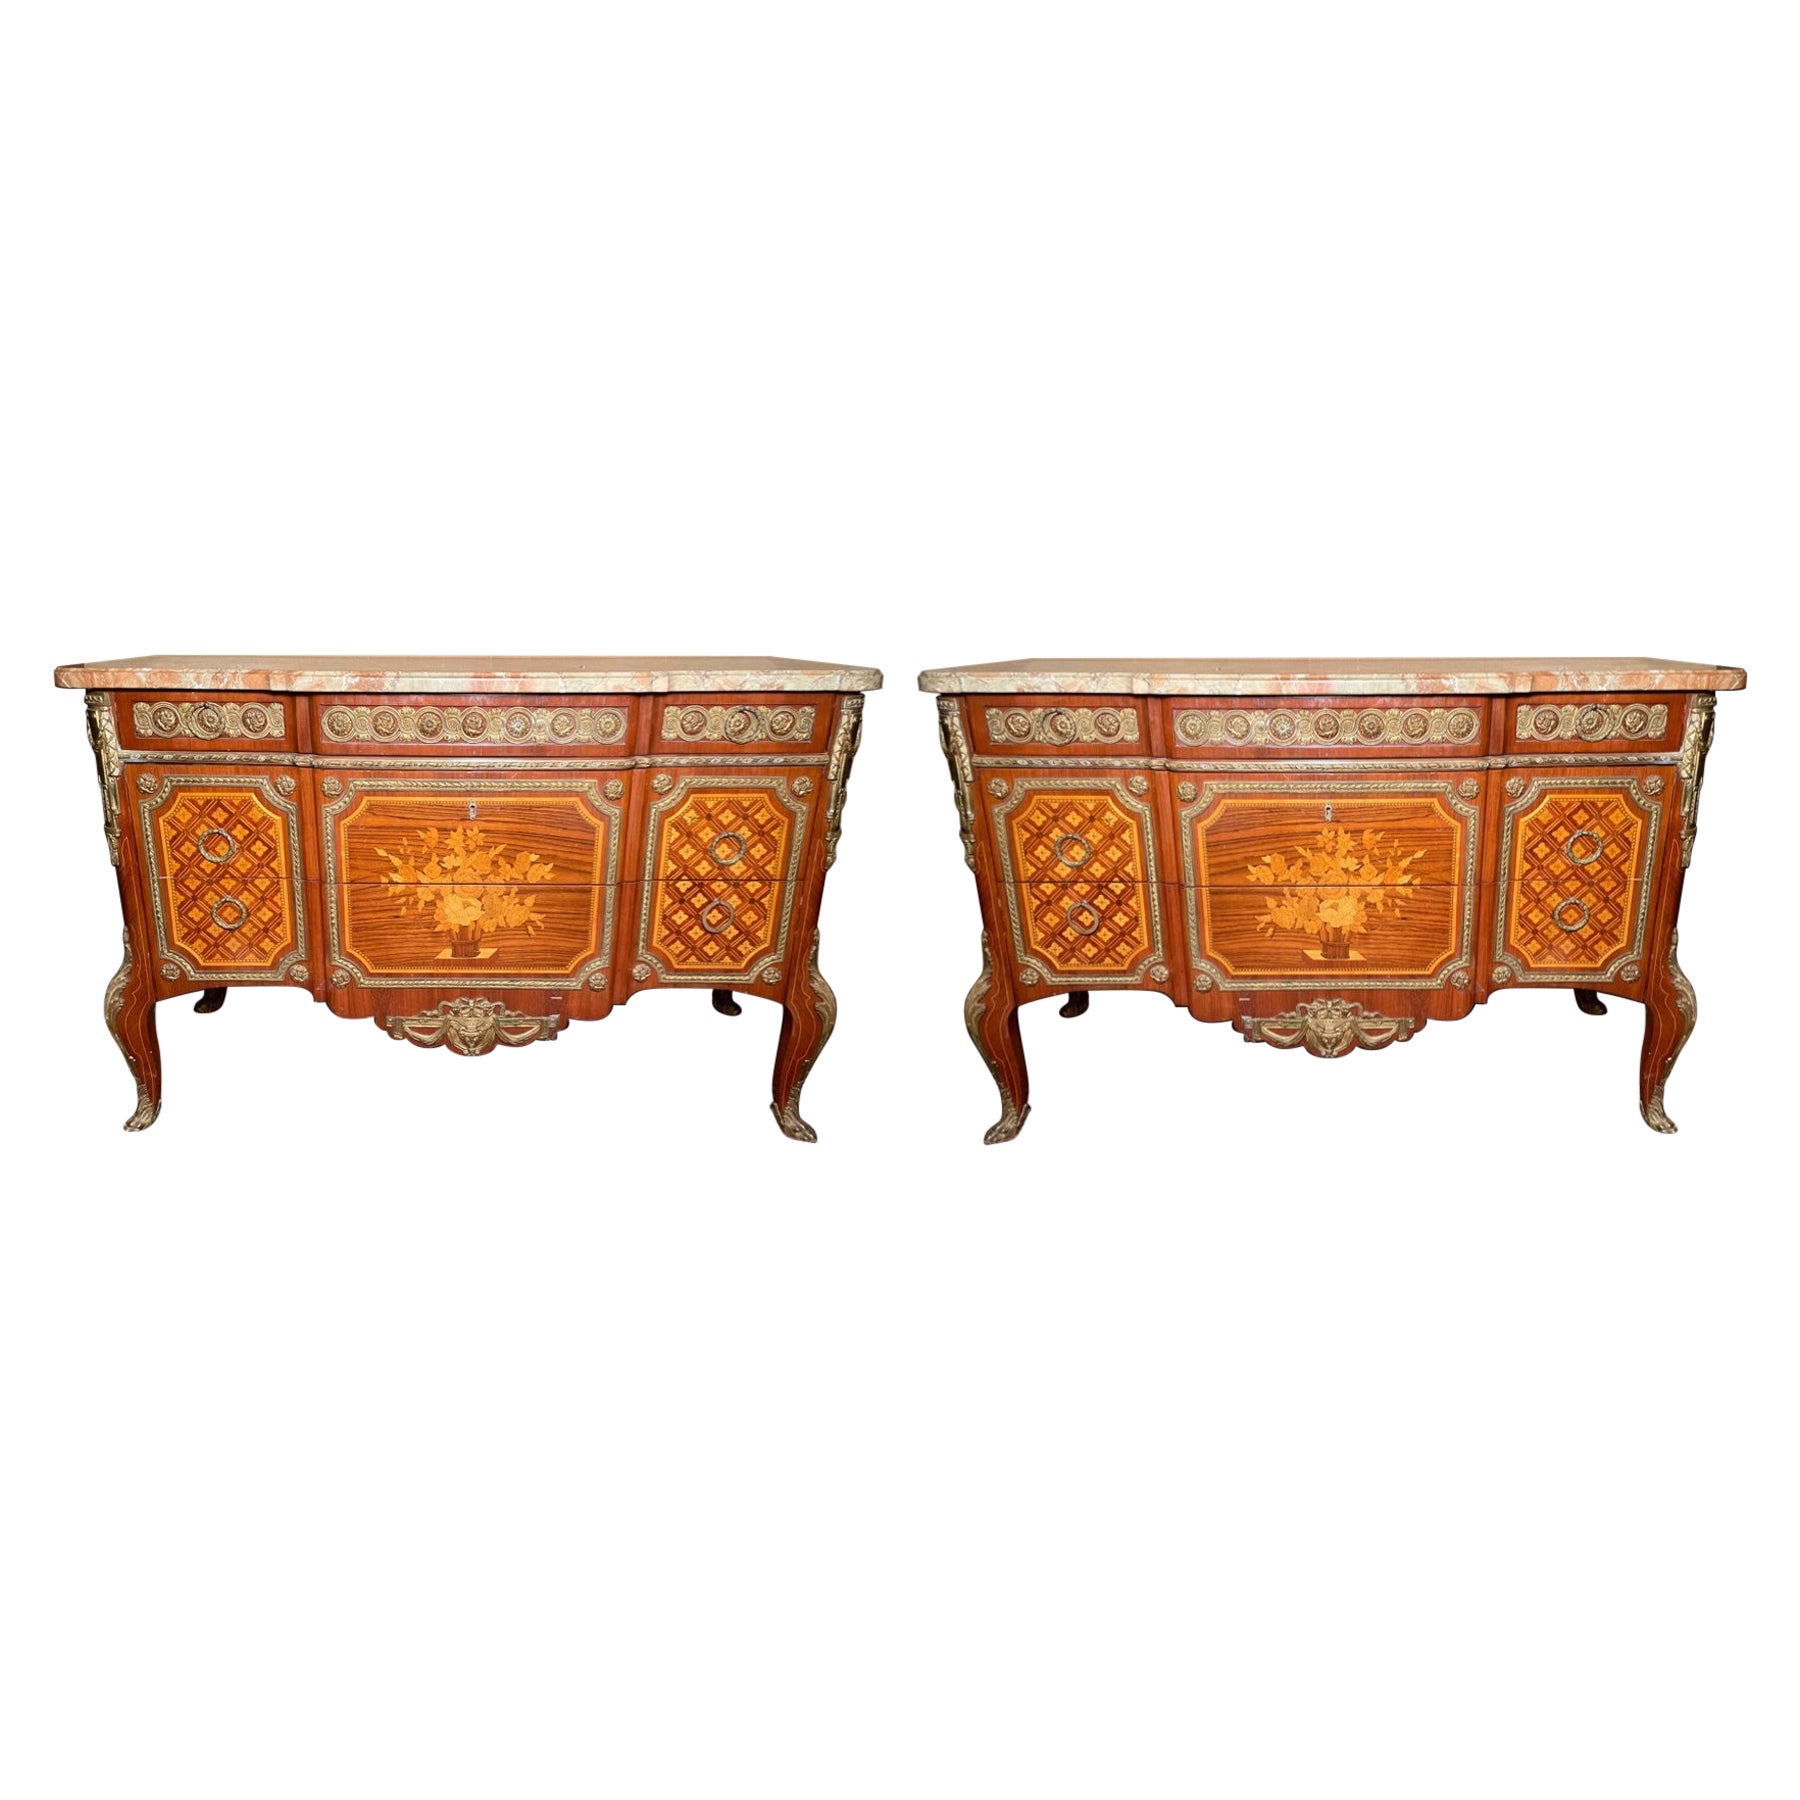 Pair Antique French Gold Bronze Mounted Marble Top Marquetry Commodes circa 1900